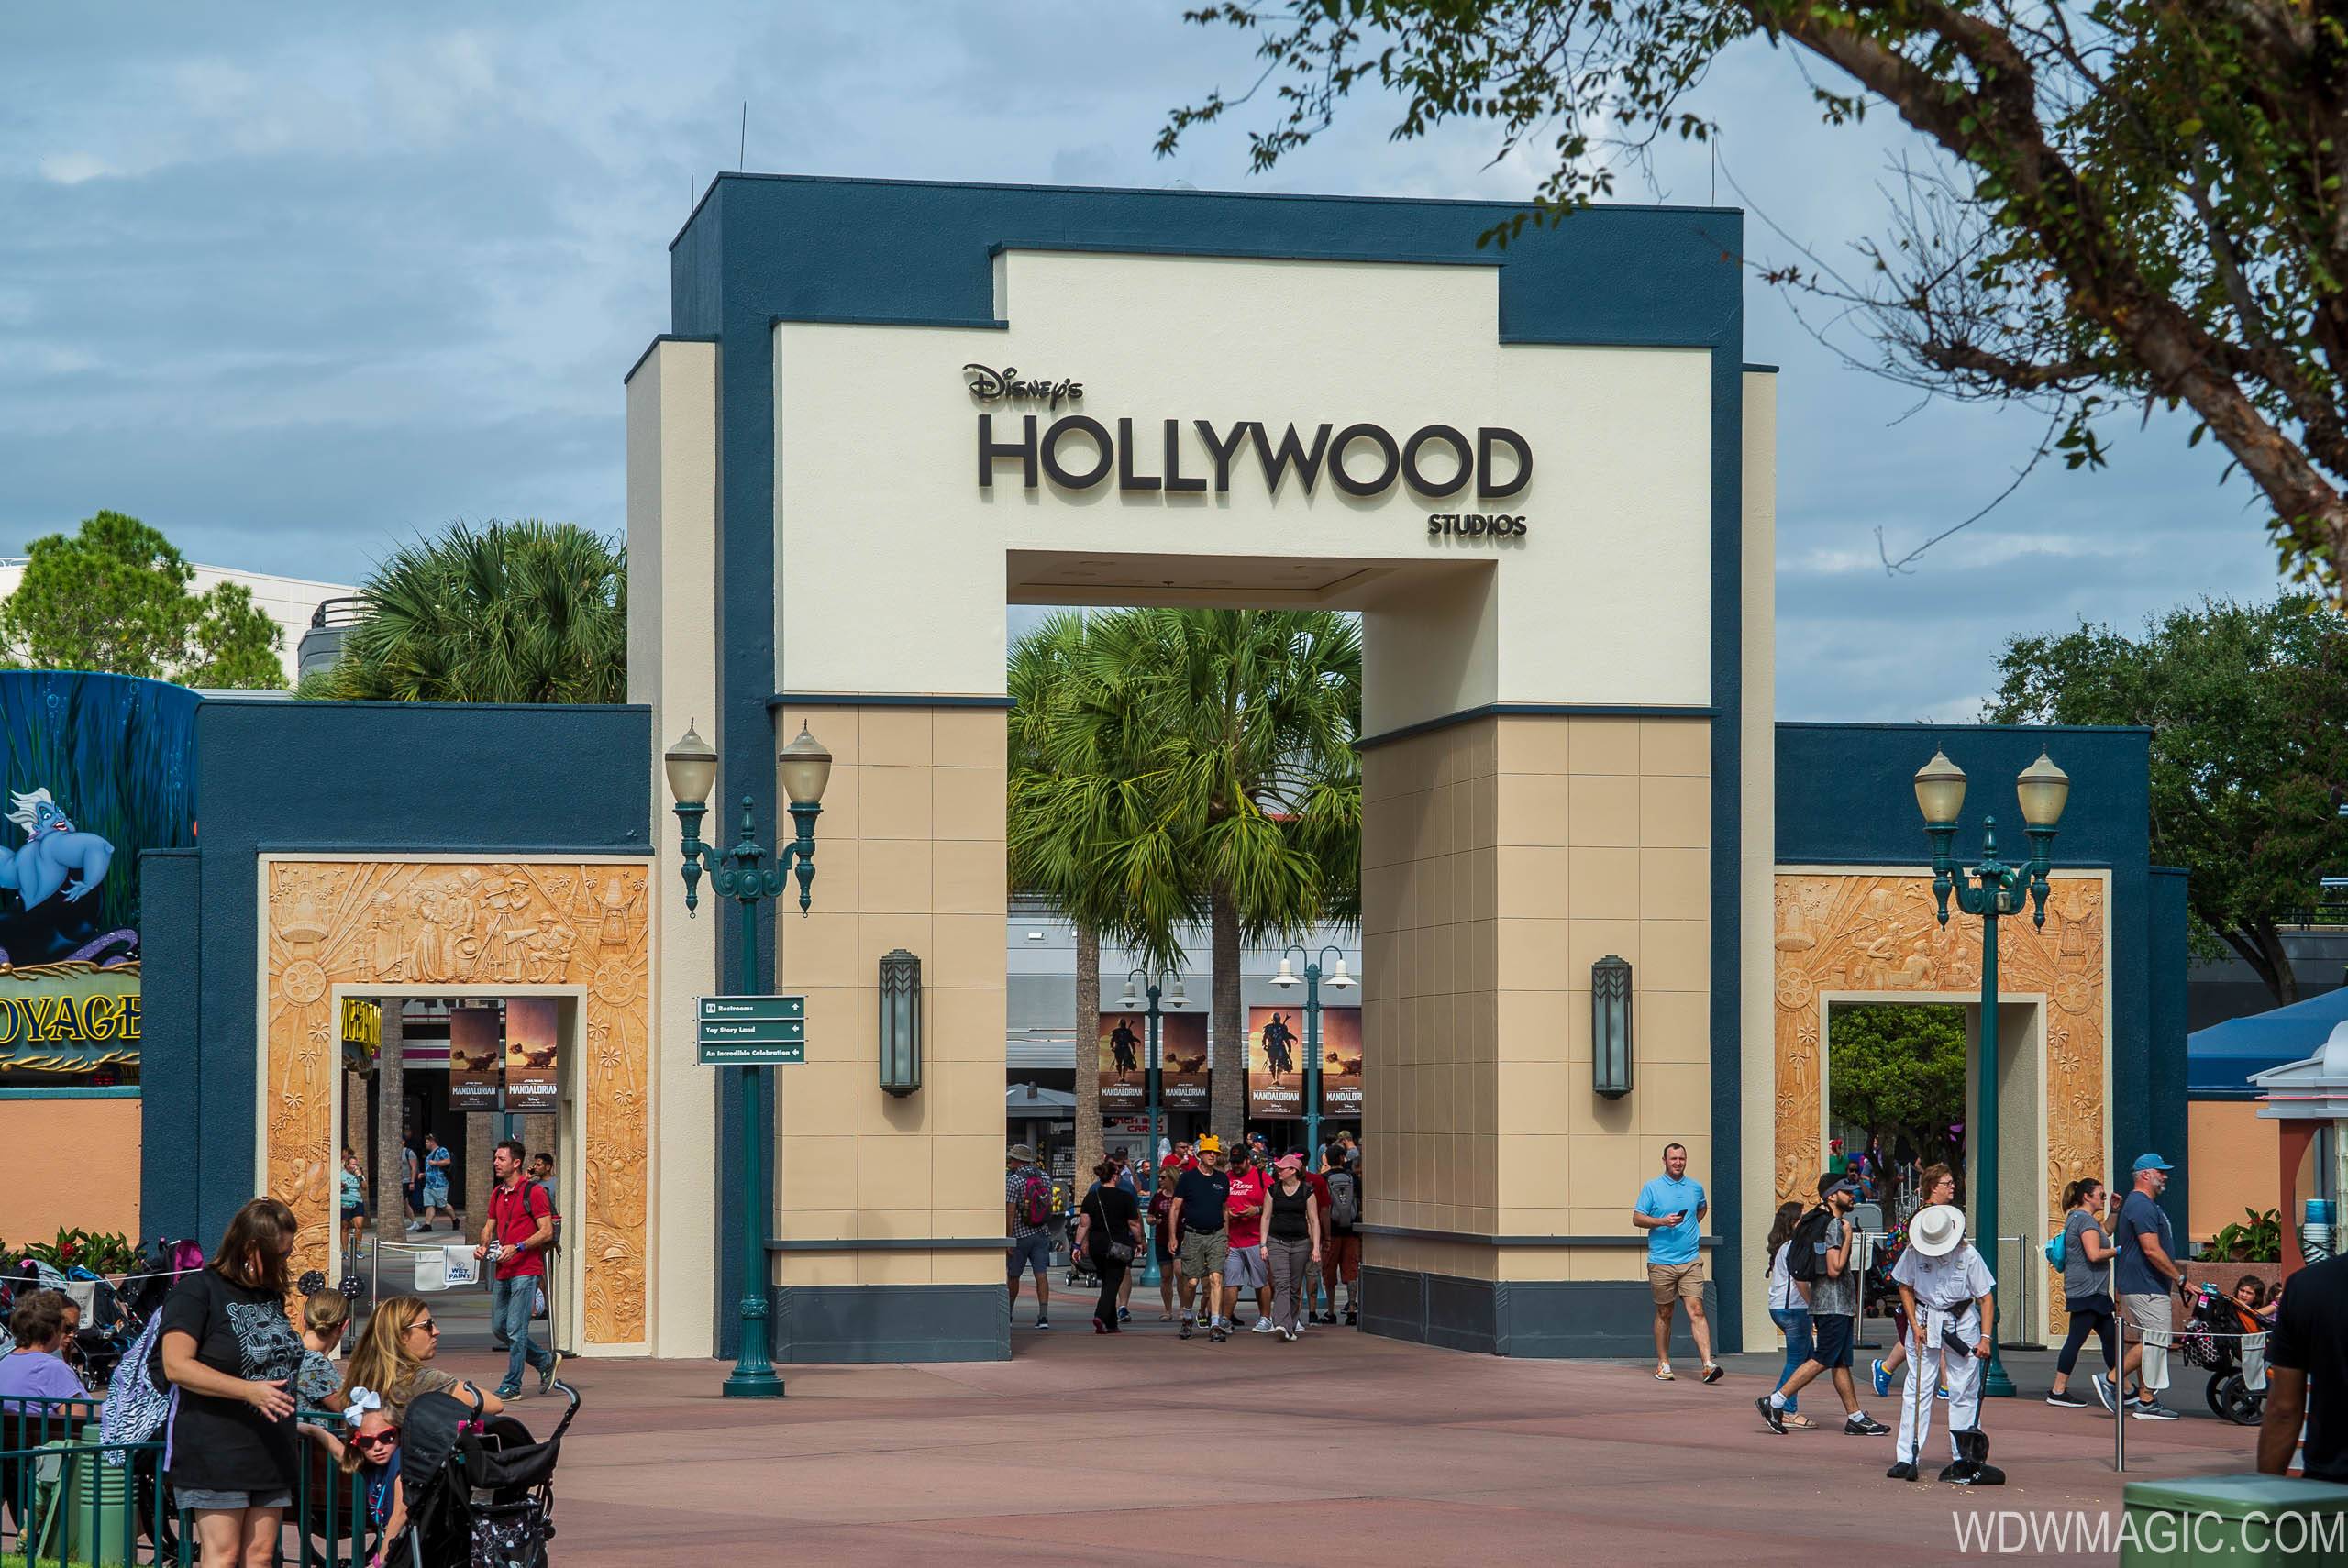 PHOTOS - New logo installed on the Studio archway at Disney's Hollywood Studios